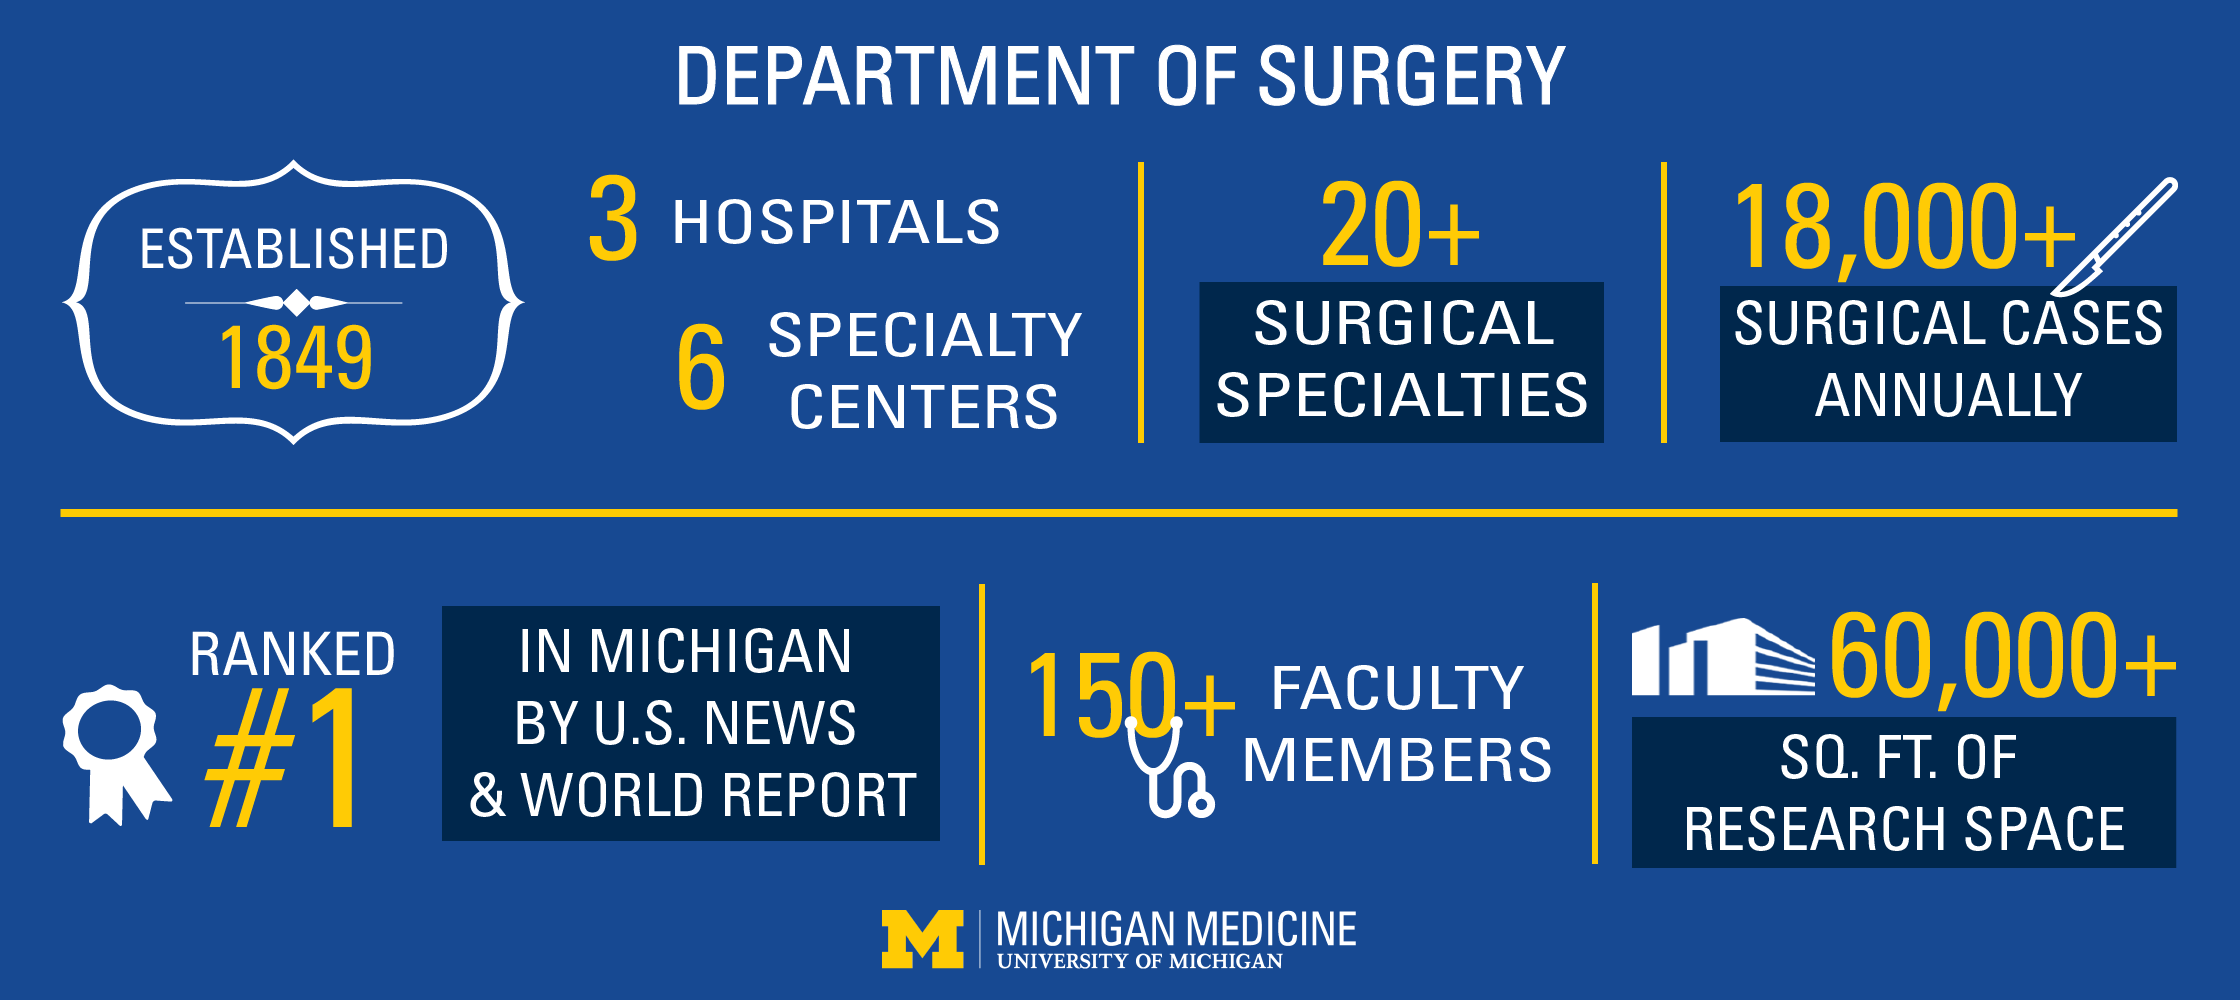 Established in 1849, our department now has 150+ faculty members across 20+ surgical specialties with 18000+ surgical cases annually. Ranked #1 in MI by U.S. News & World Report, we have 3 hospitals, 6 specialty centers and 60000+ sq ft of research space.